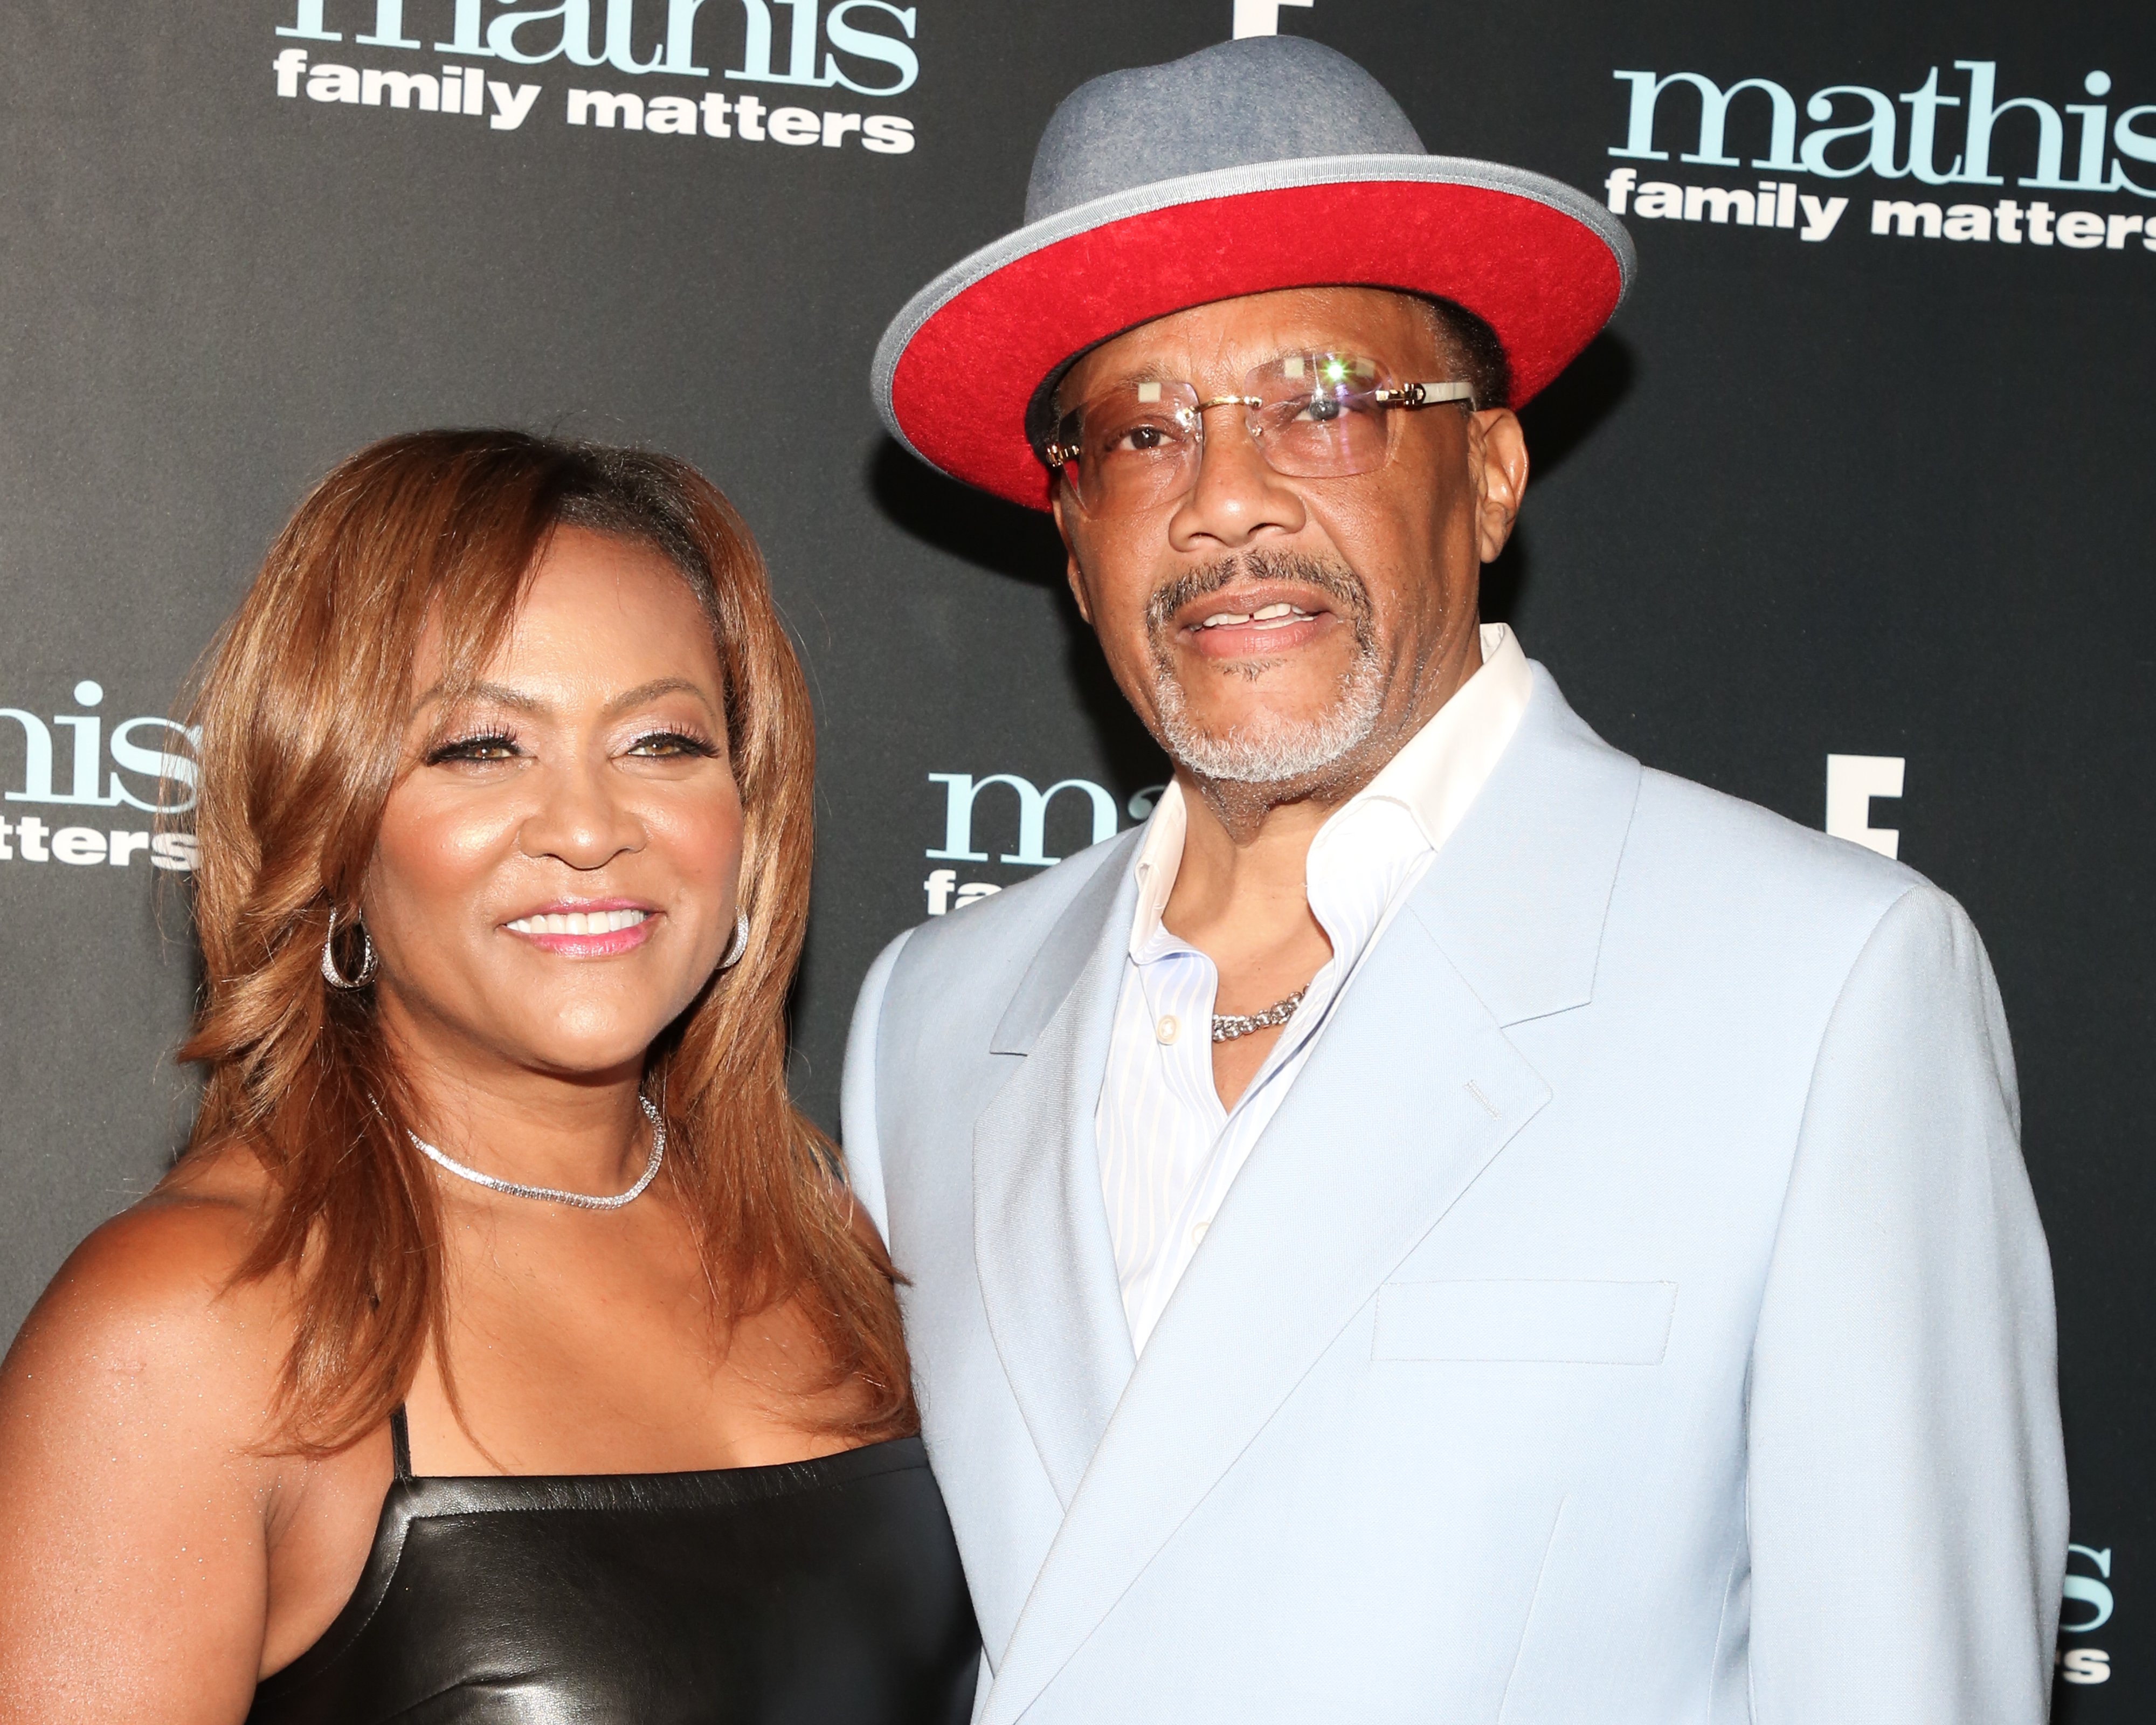 Linda Reese Mathis (L) and Greg Mathis (R) attend the premiere of E!'s new series "Mathis Family Matters" at Casita Hollywood, on June 17, 2022, in Los Angeles, California. | Source: Getty Images